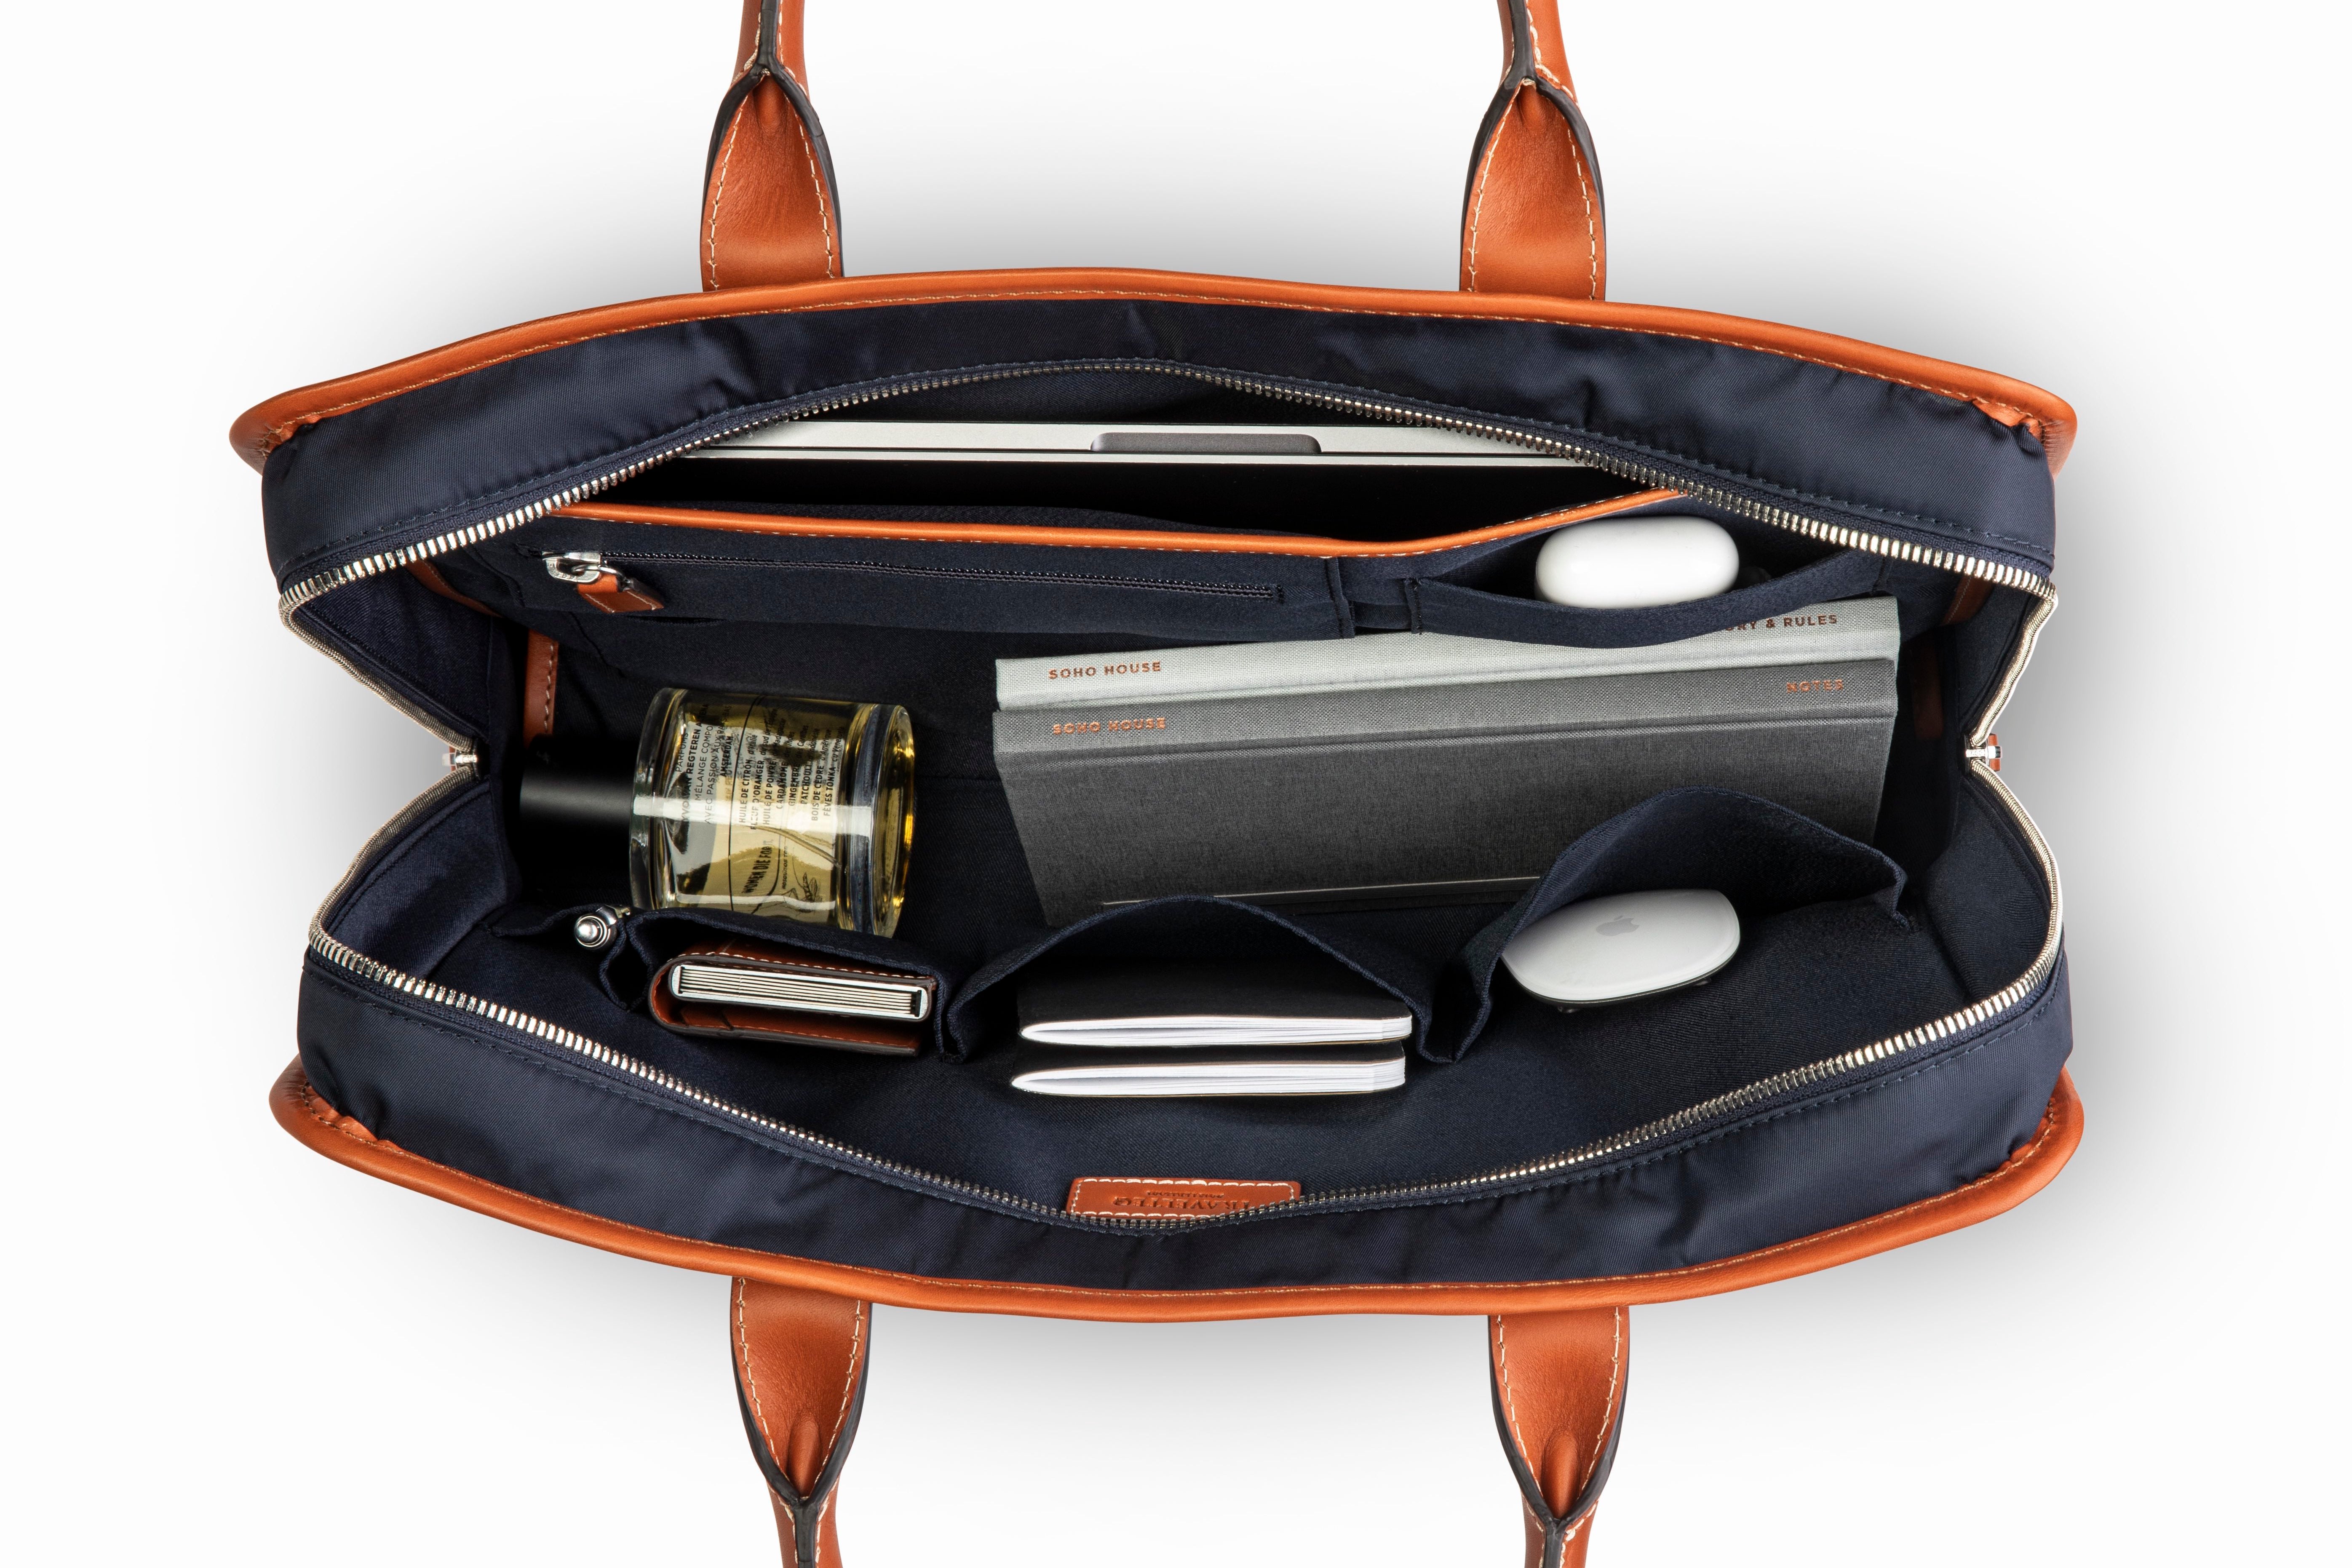 Travelteq's ultimate Back To Work briefcase